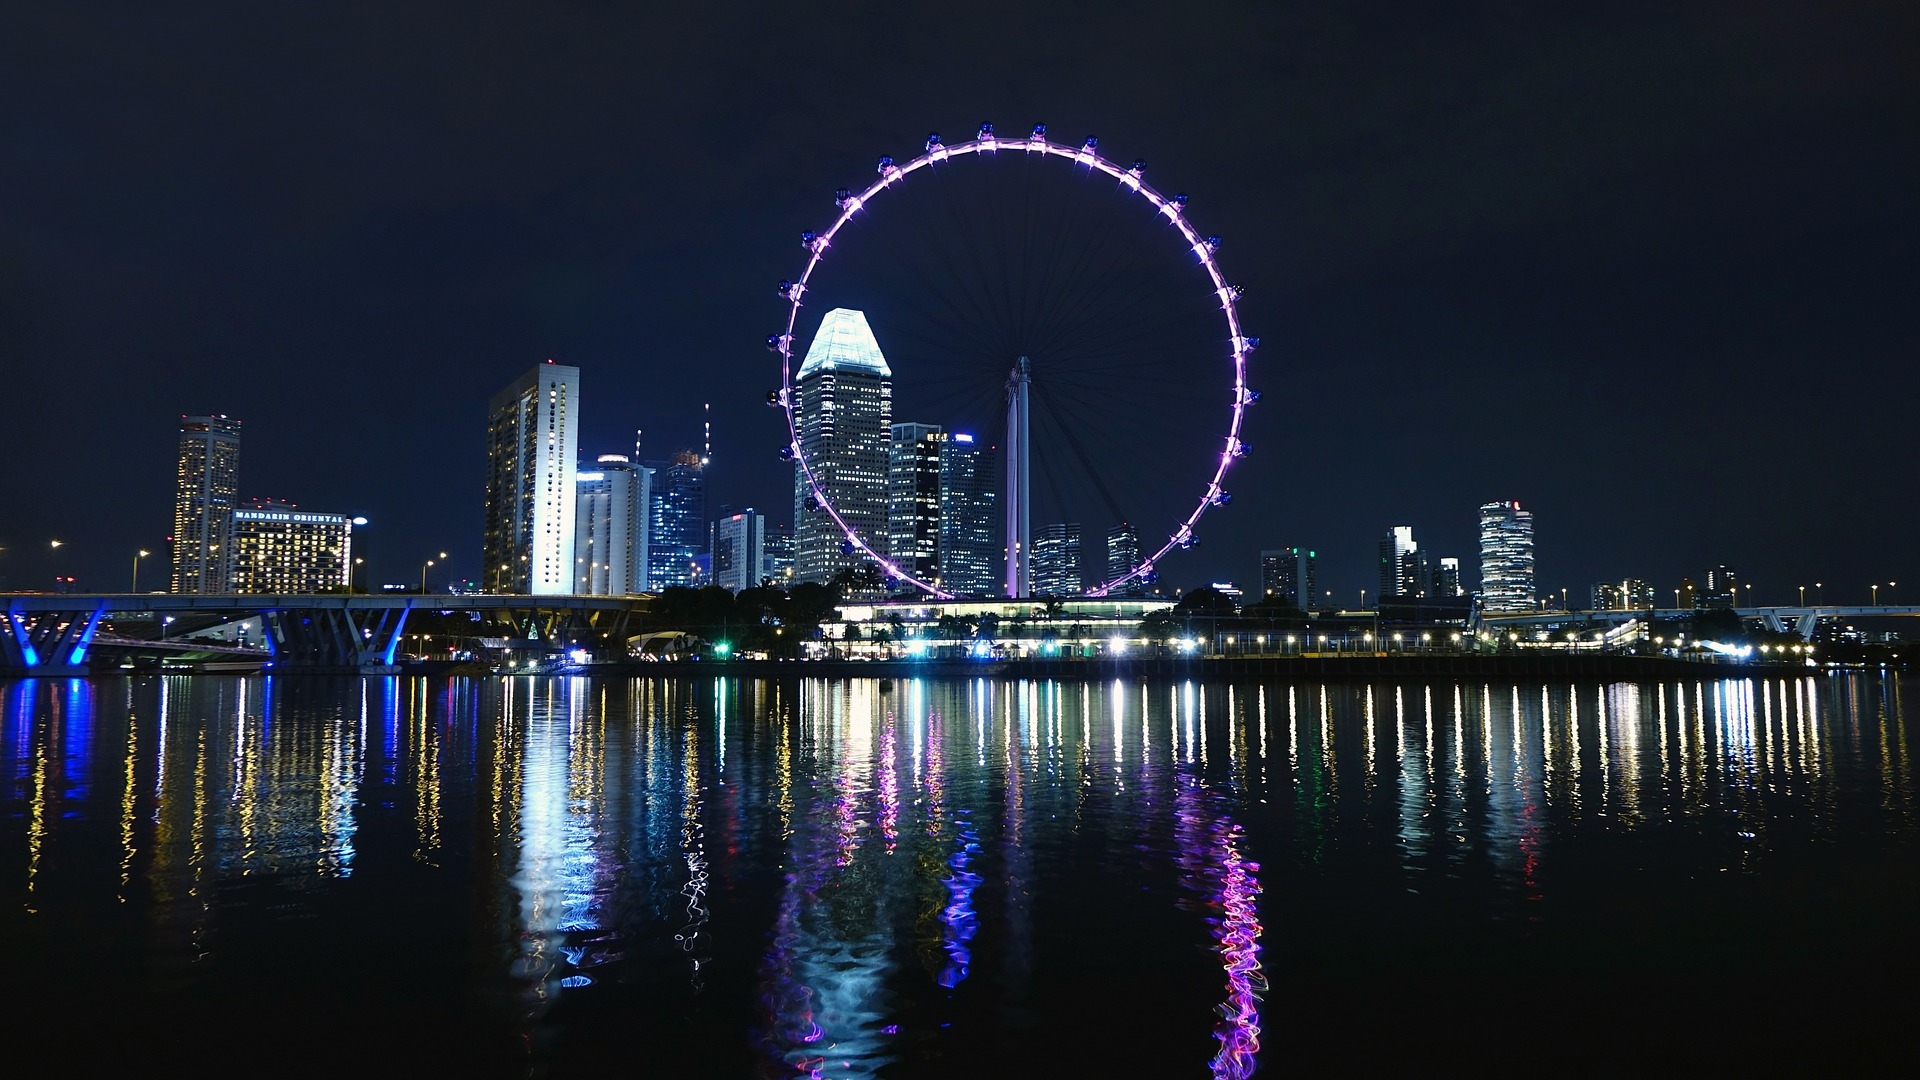 Singapore Flyer- A giant observation wheel that gives you spectacular views of the city.